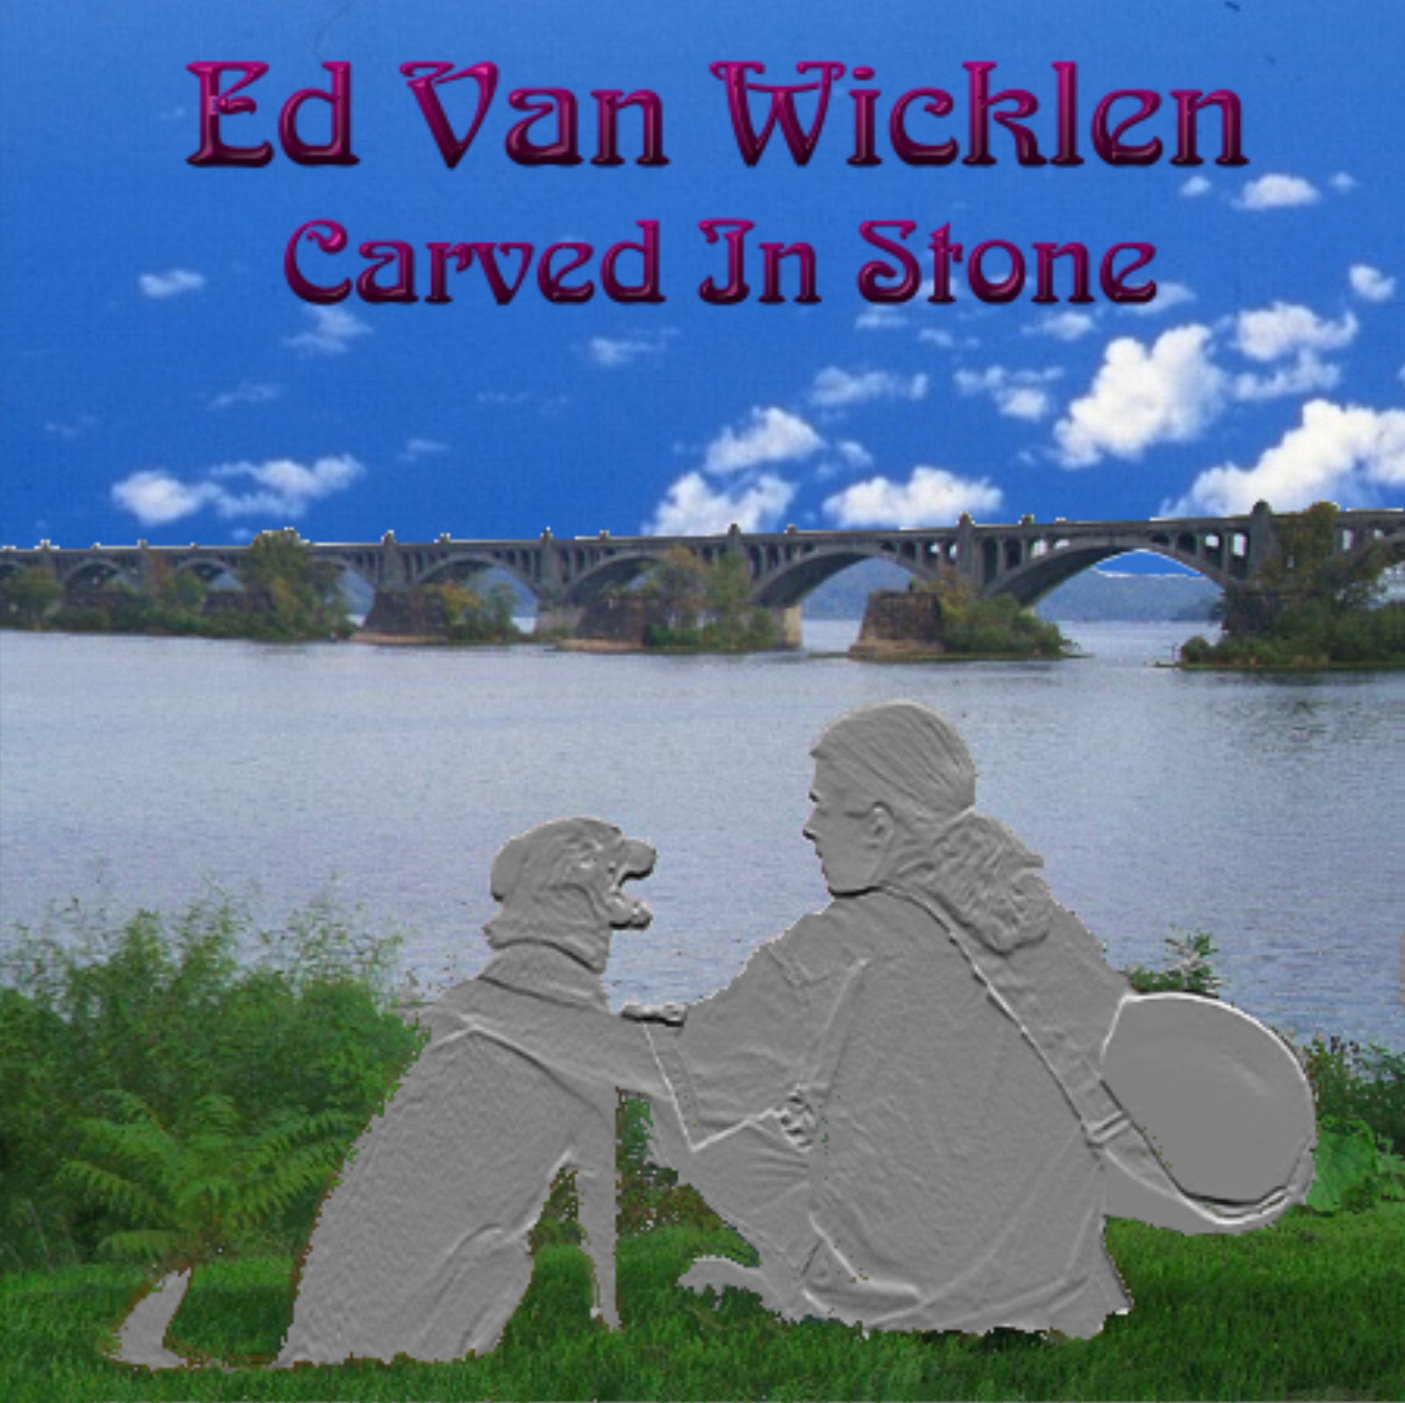 Ed Van Wicklen - Carved in Stone - Available on iTunes Now